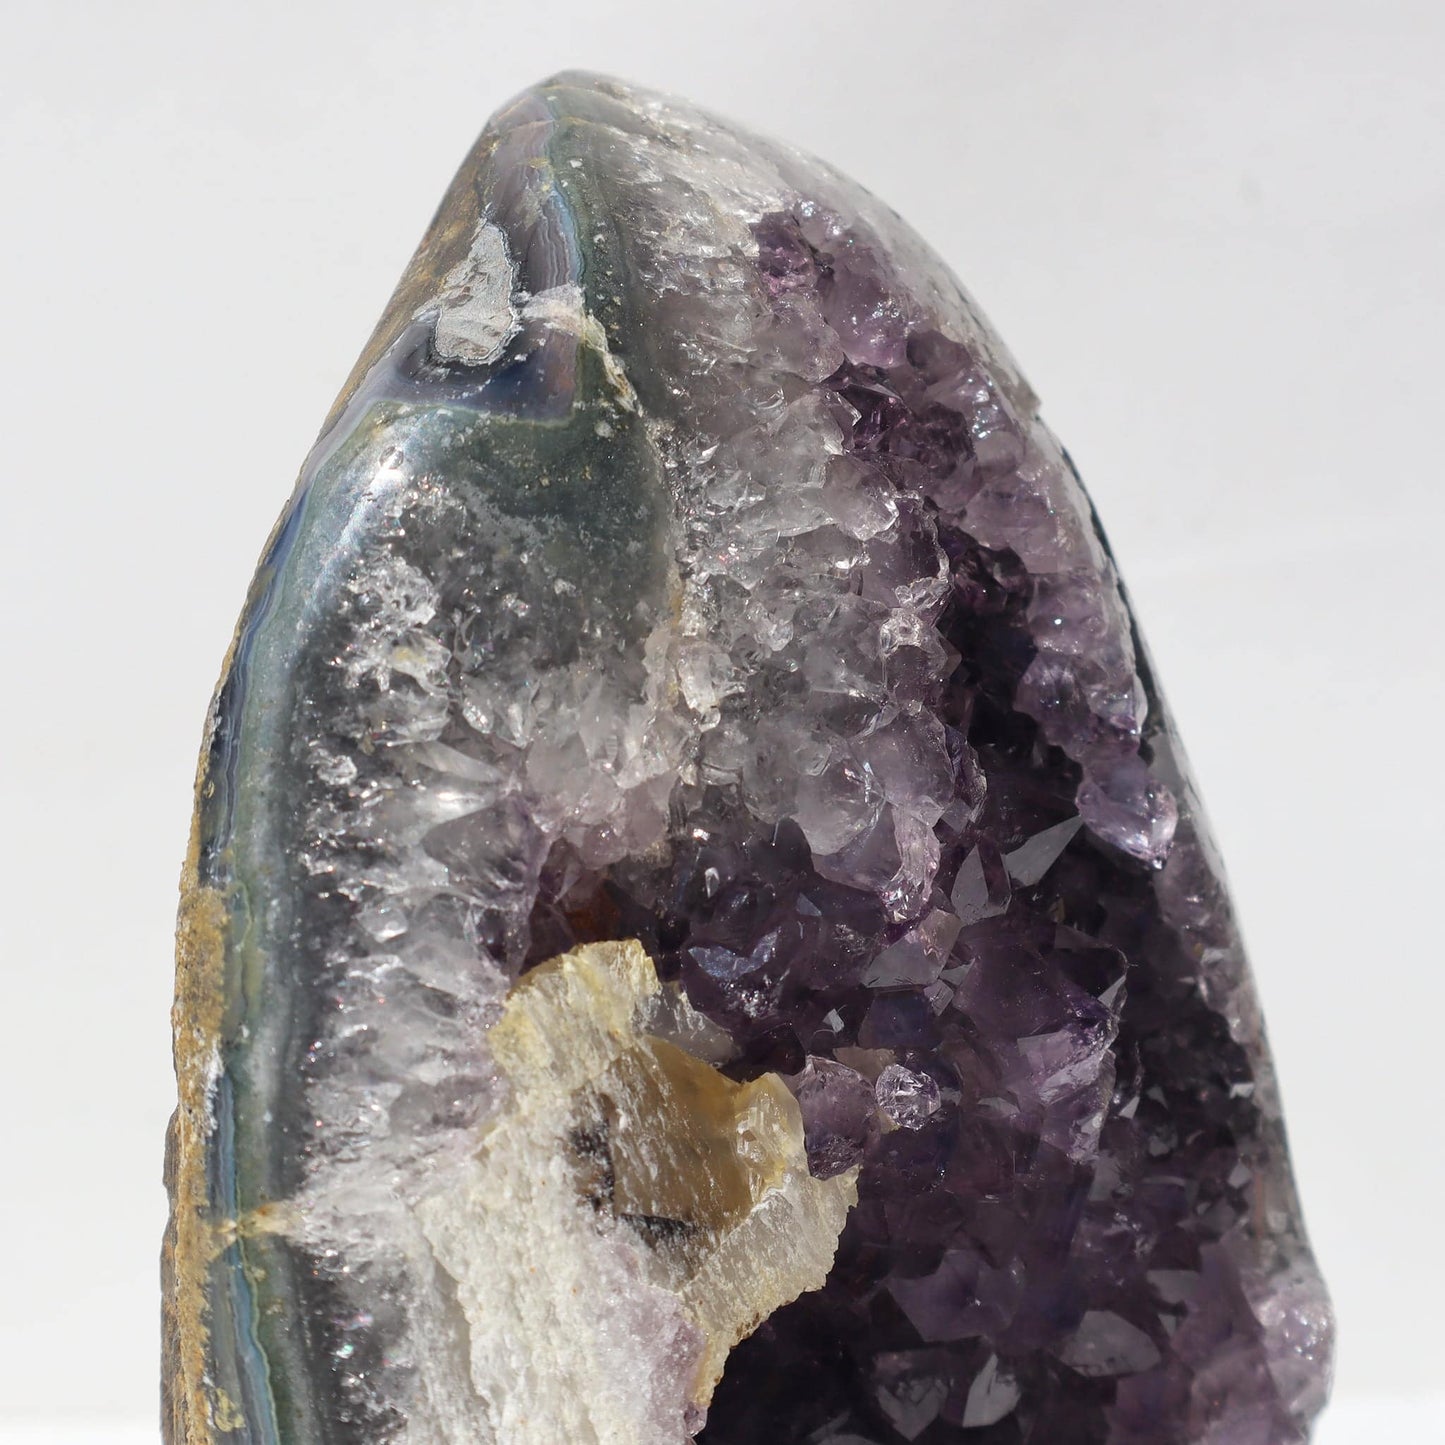 Violet Crystals and Green JasperRare Amethyst Jasper Geode Sale High Quality from Uruguay  - Deepest Earth